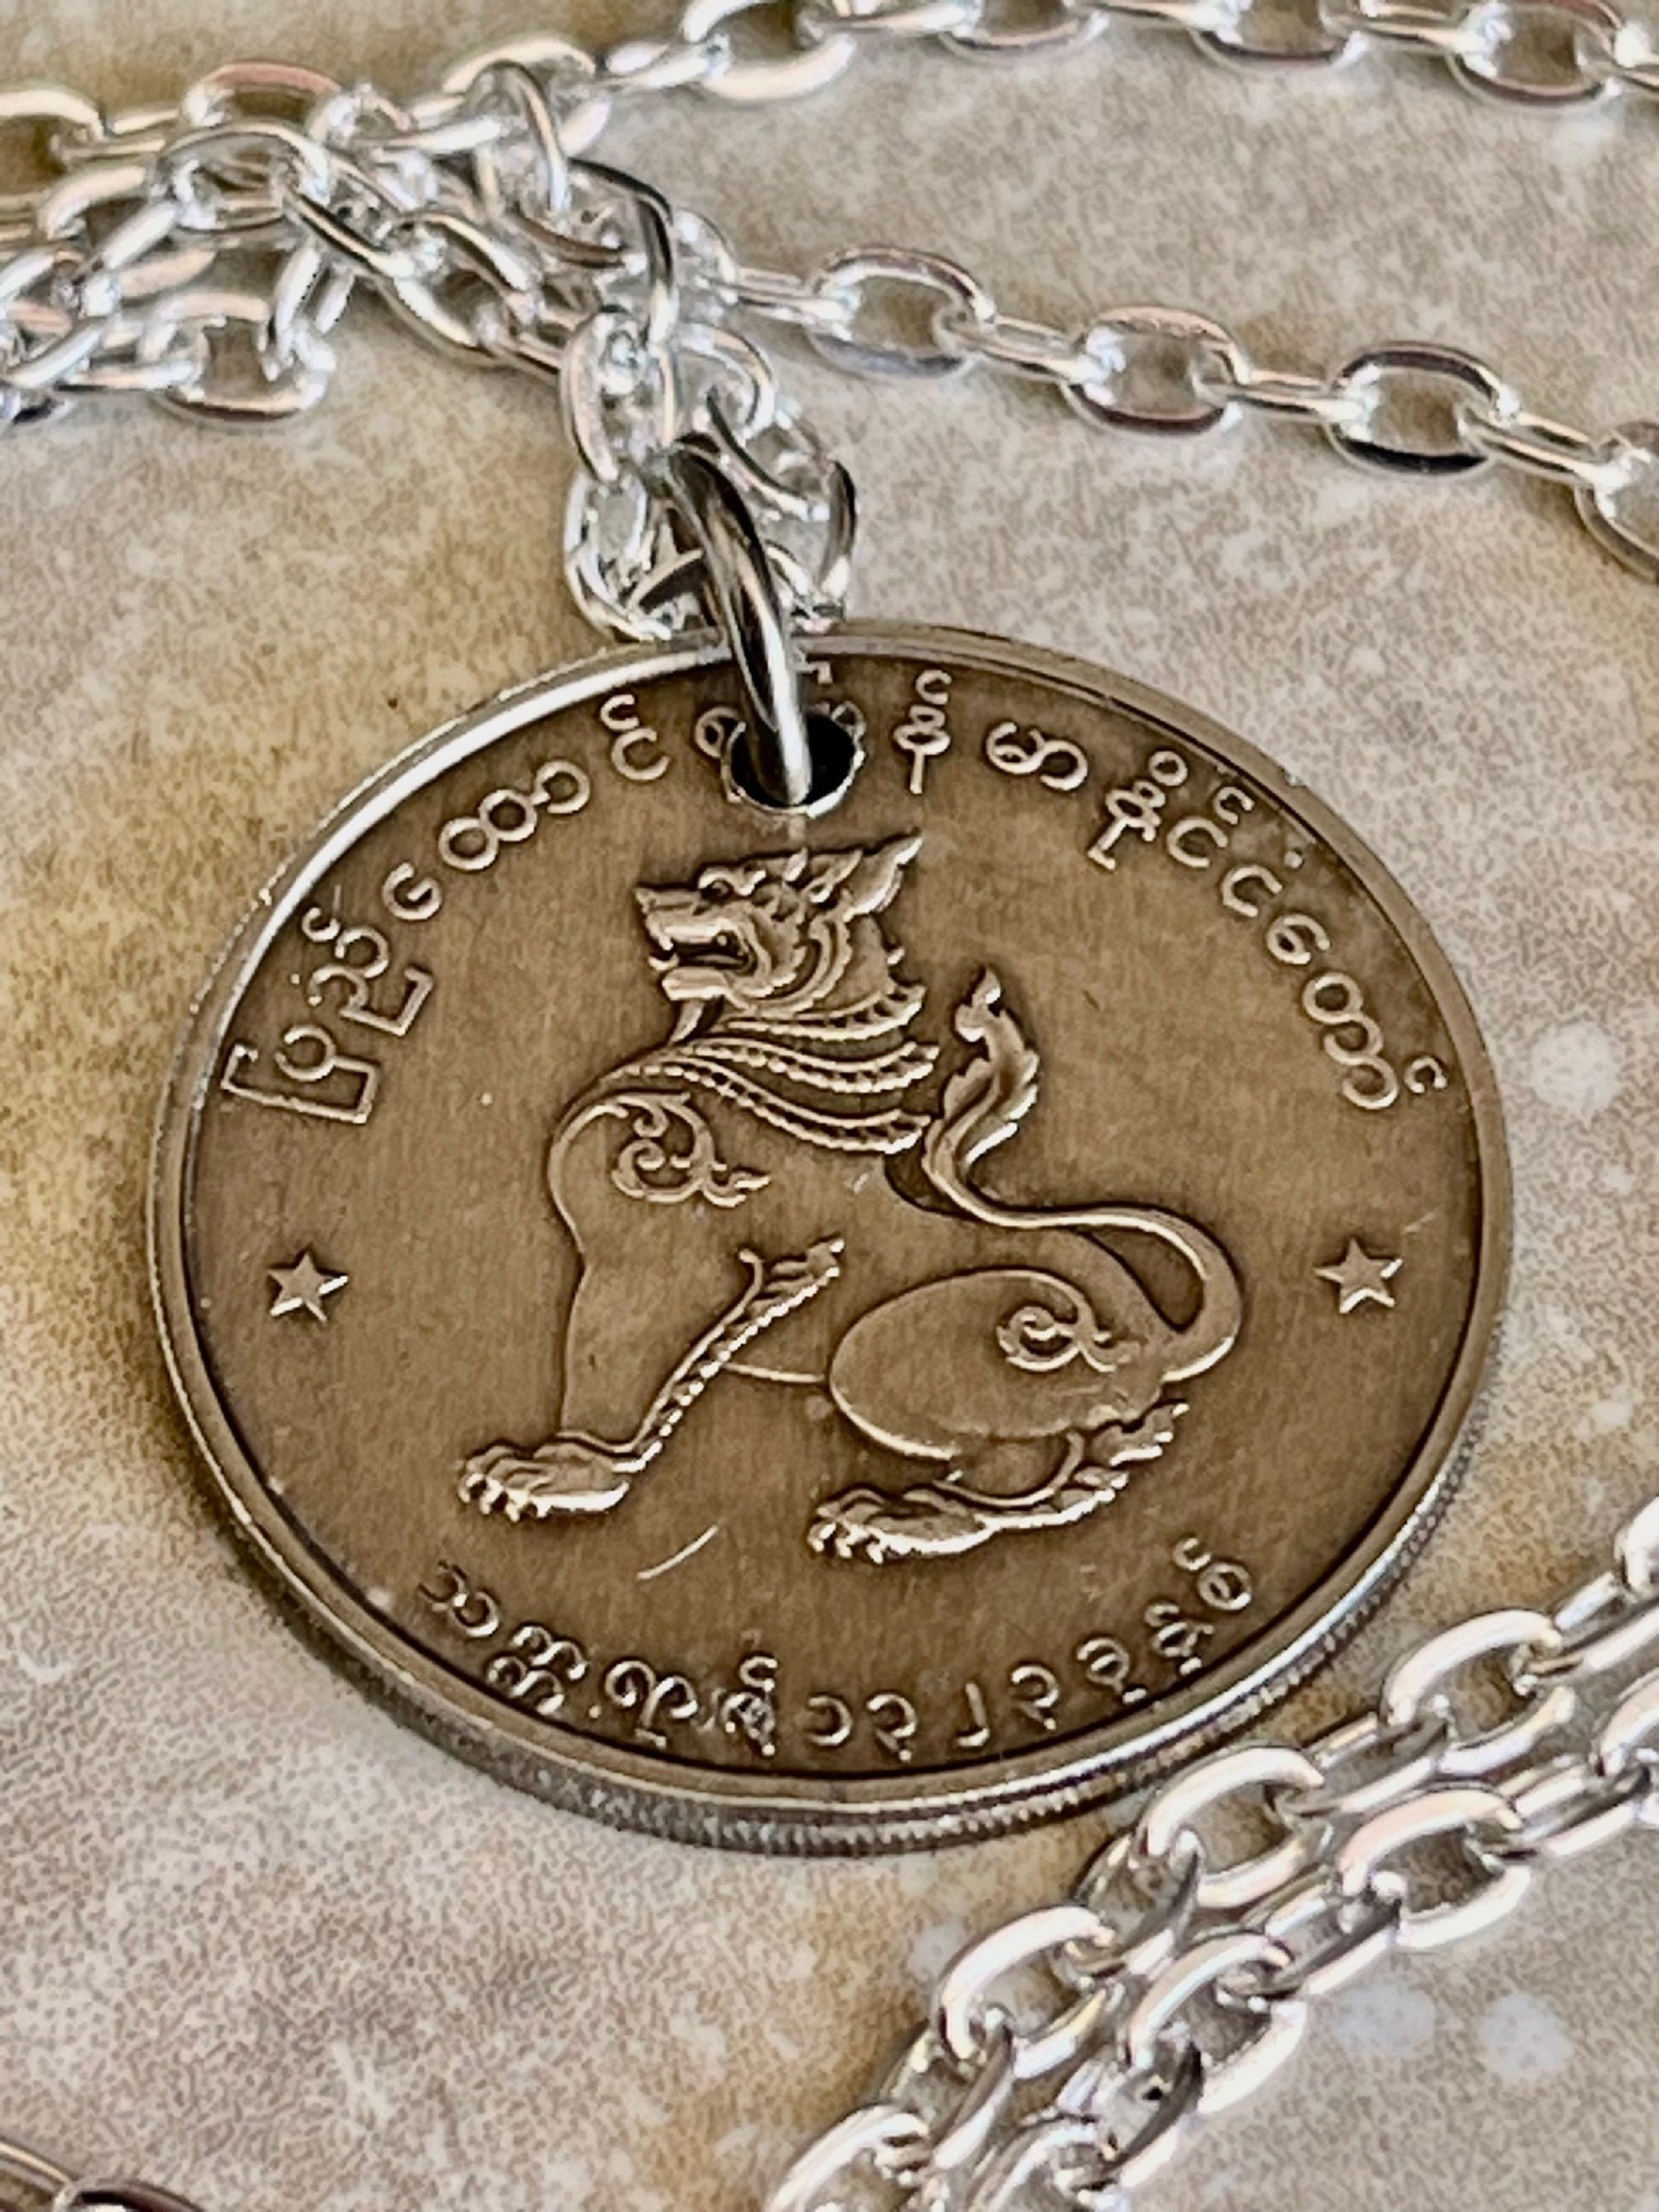 Burma Myanmar Coin Pendant with Lion Custom Personal Necklace Vintage Handmade Jewelry Gift Friend Charm For Him Her World Coin Collector